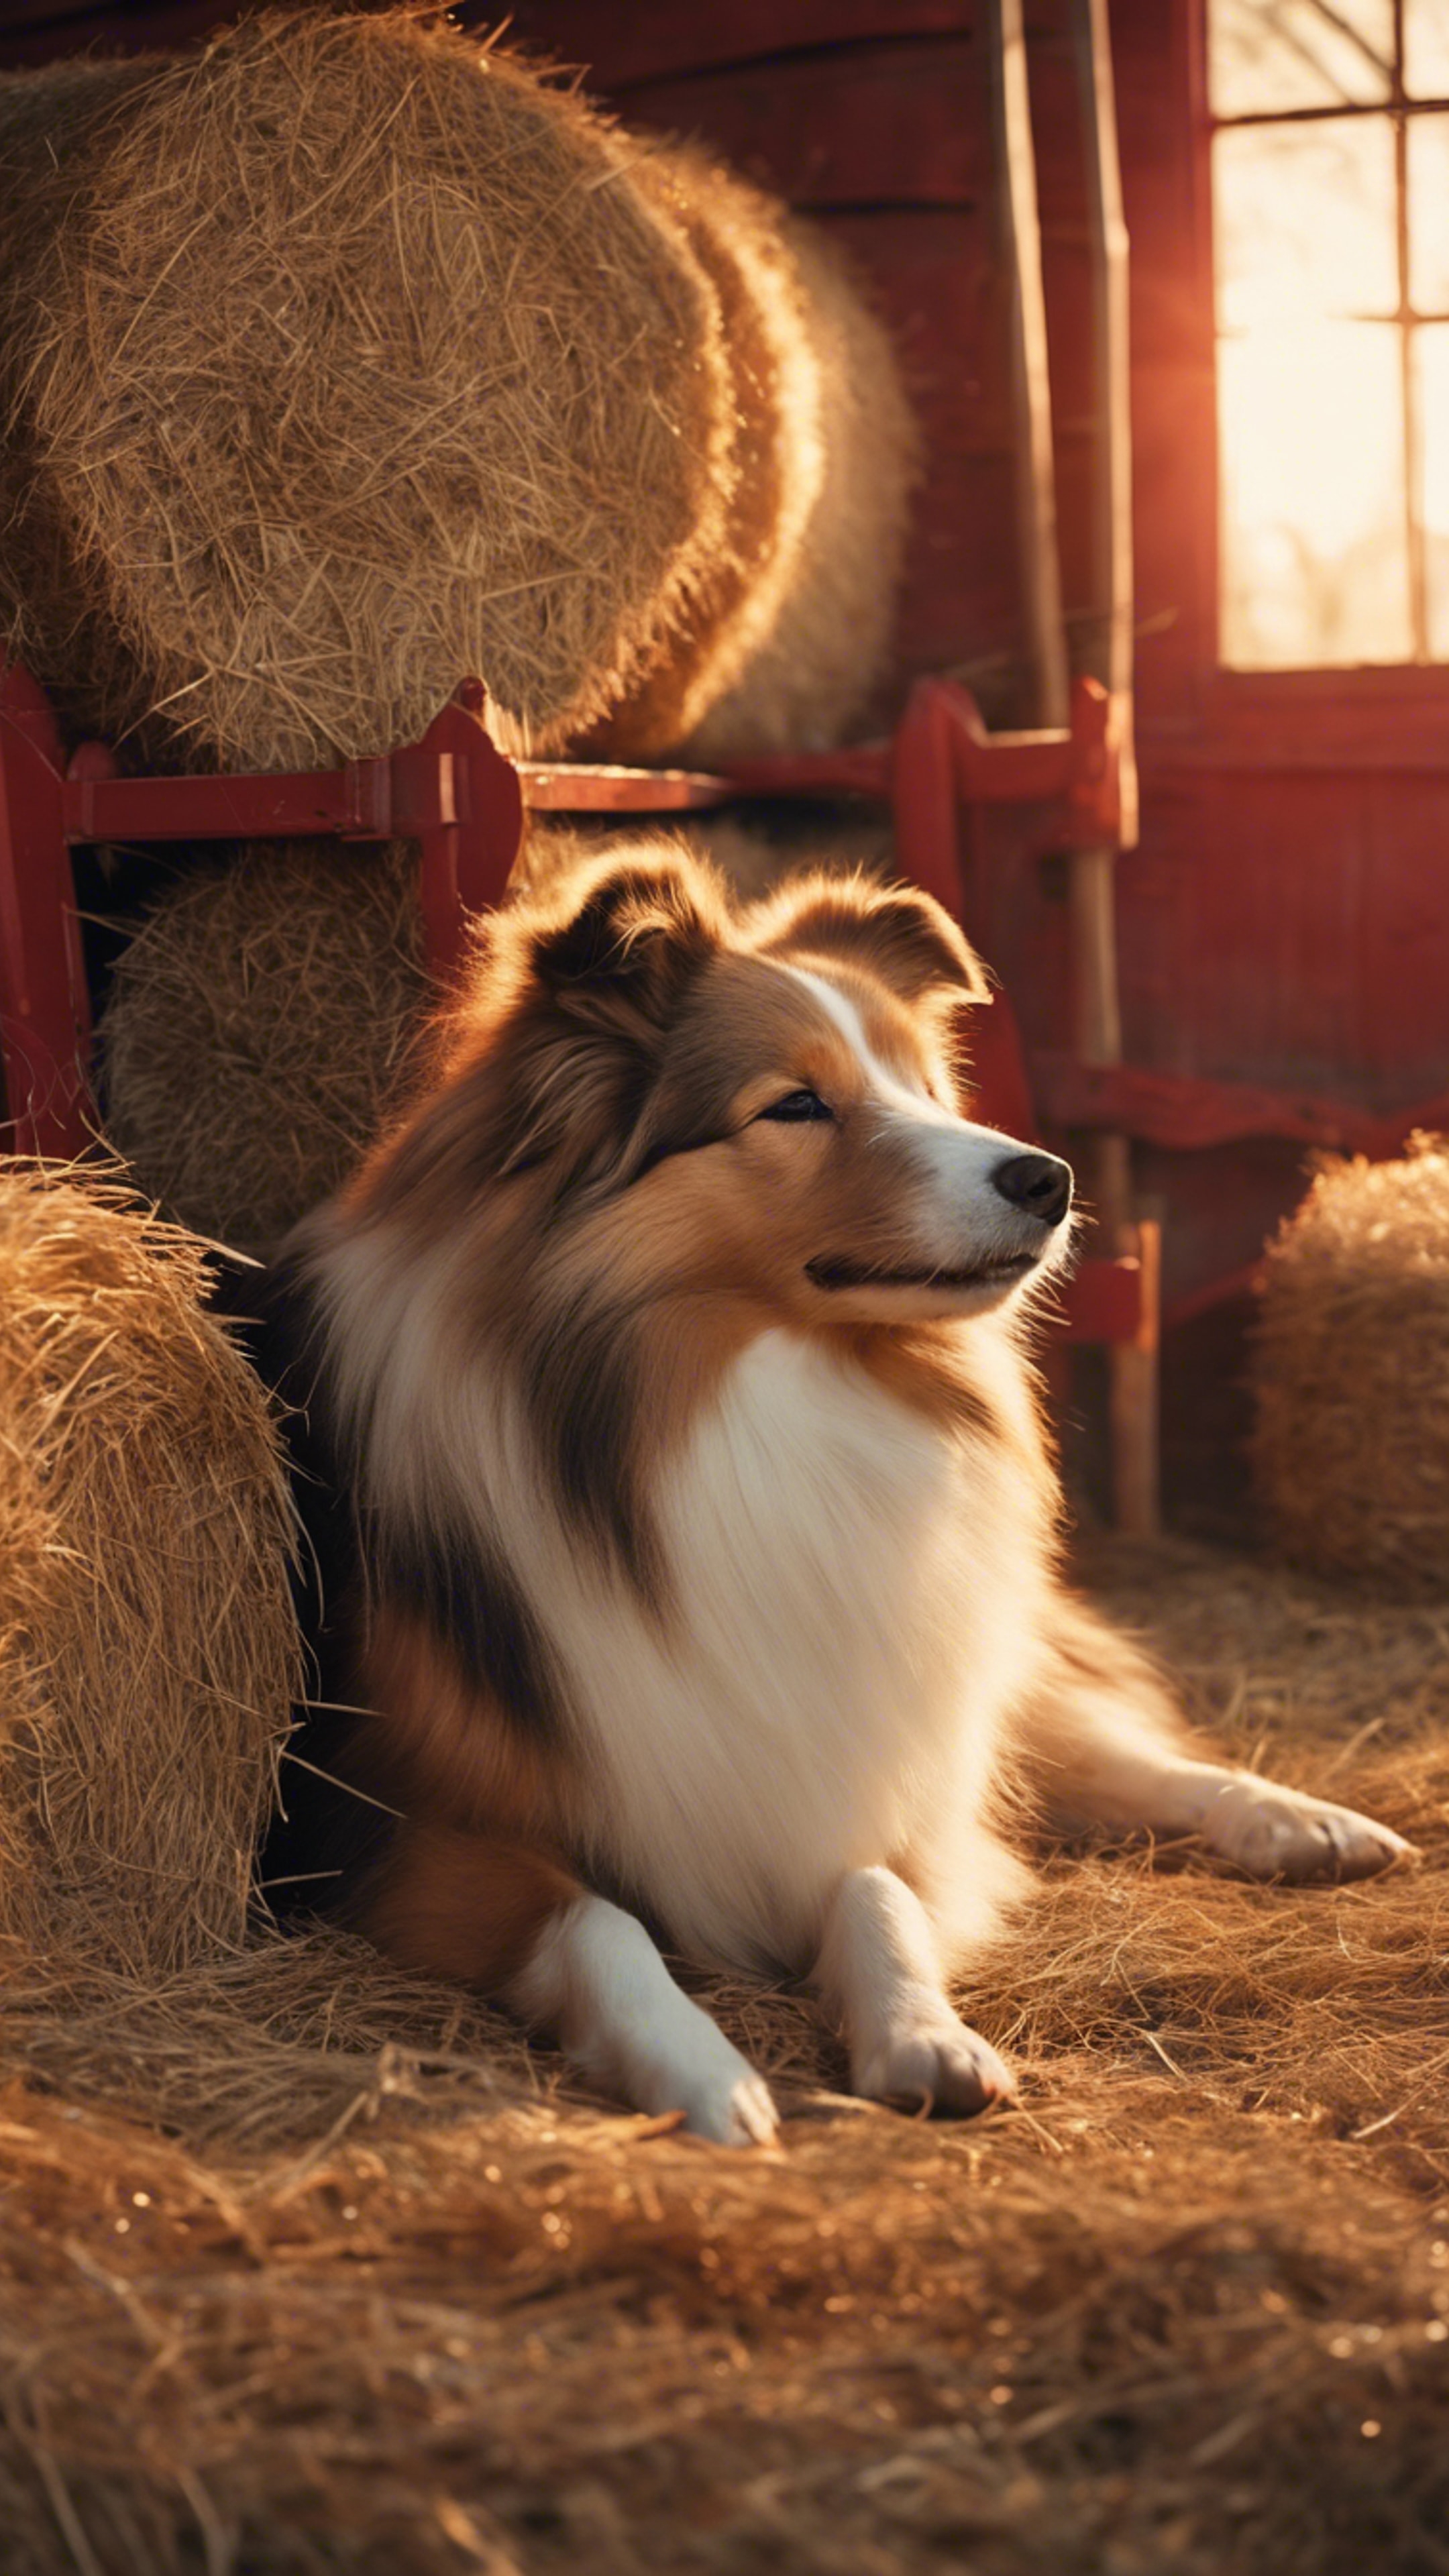 A Shetland Sheepdog sleeping in a vintage red barn, surrounded by hay balls and a setting sun. Tapet[4b8e09167f2043c5830e]